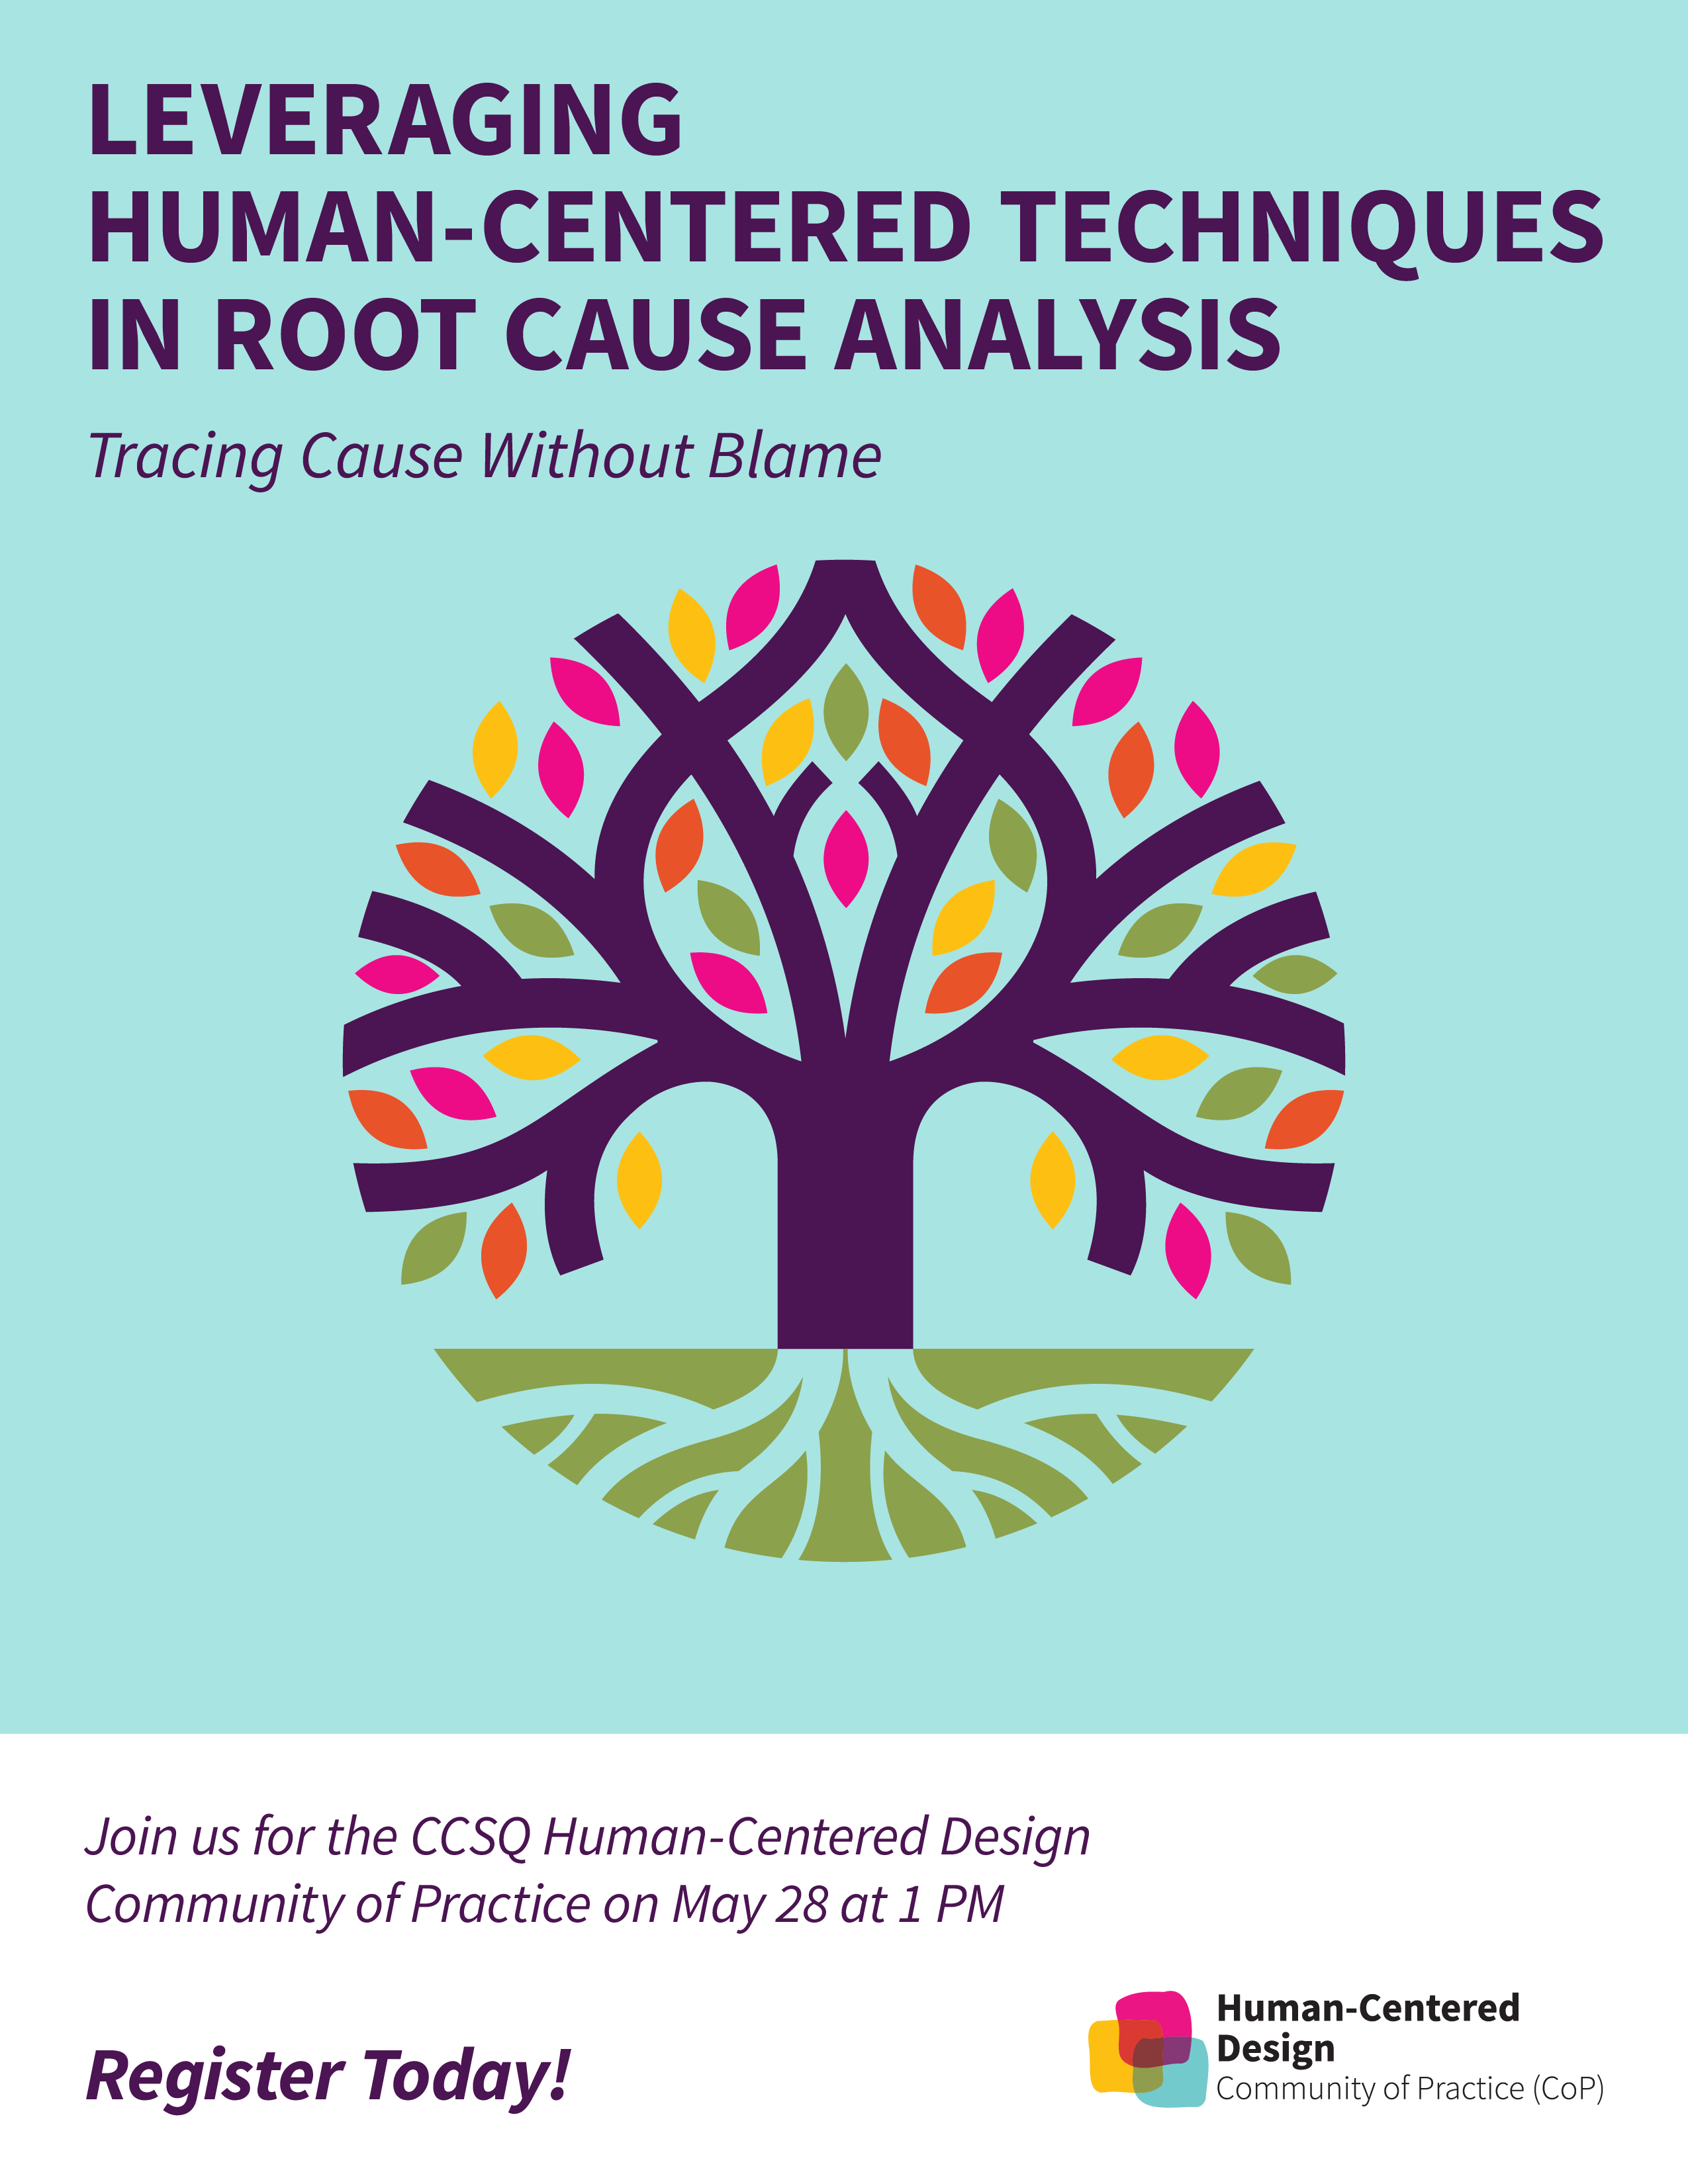 Leveraging Human-Centered Techniques in Root Cause Analysis